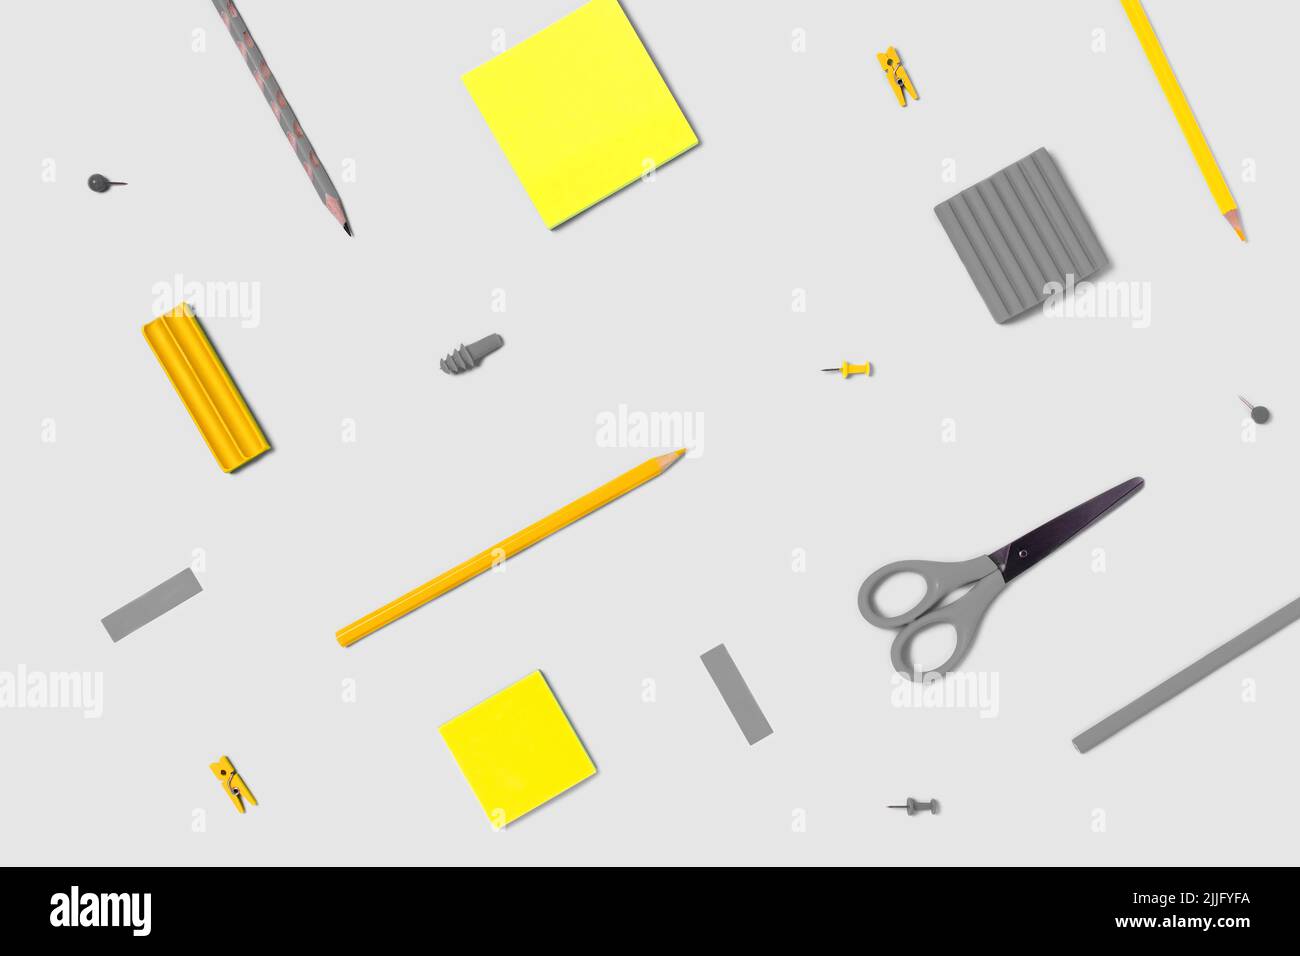 Flat lay photo with stikers, pencils, scissors, plasticine, clothespins, paper clips in yellow and gray colors. Stock Photo